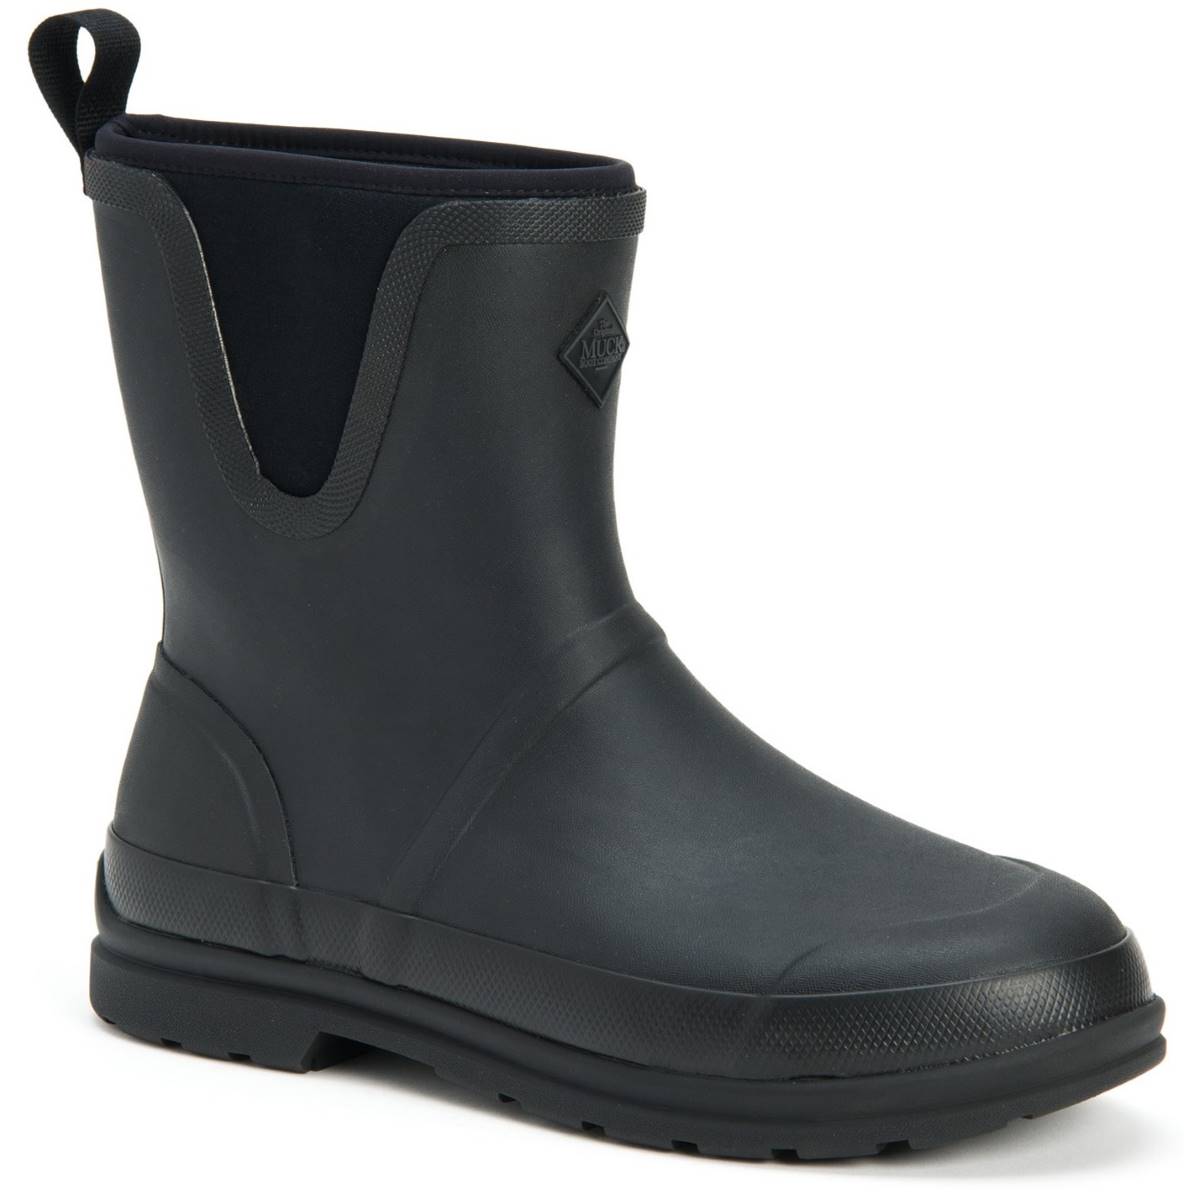 Muck Boots Originals Pull On Mid Black Mens boots OMM-000 in a Plain Rubber in Size 10